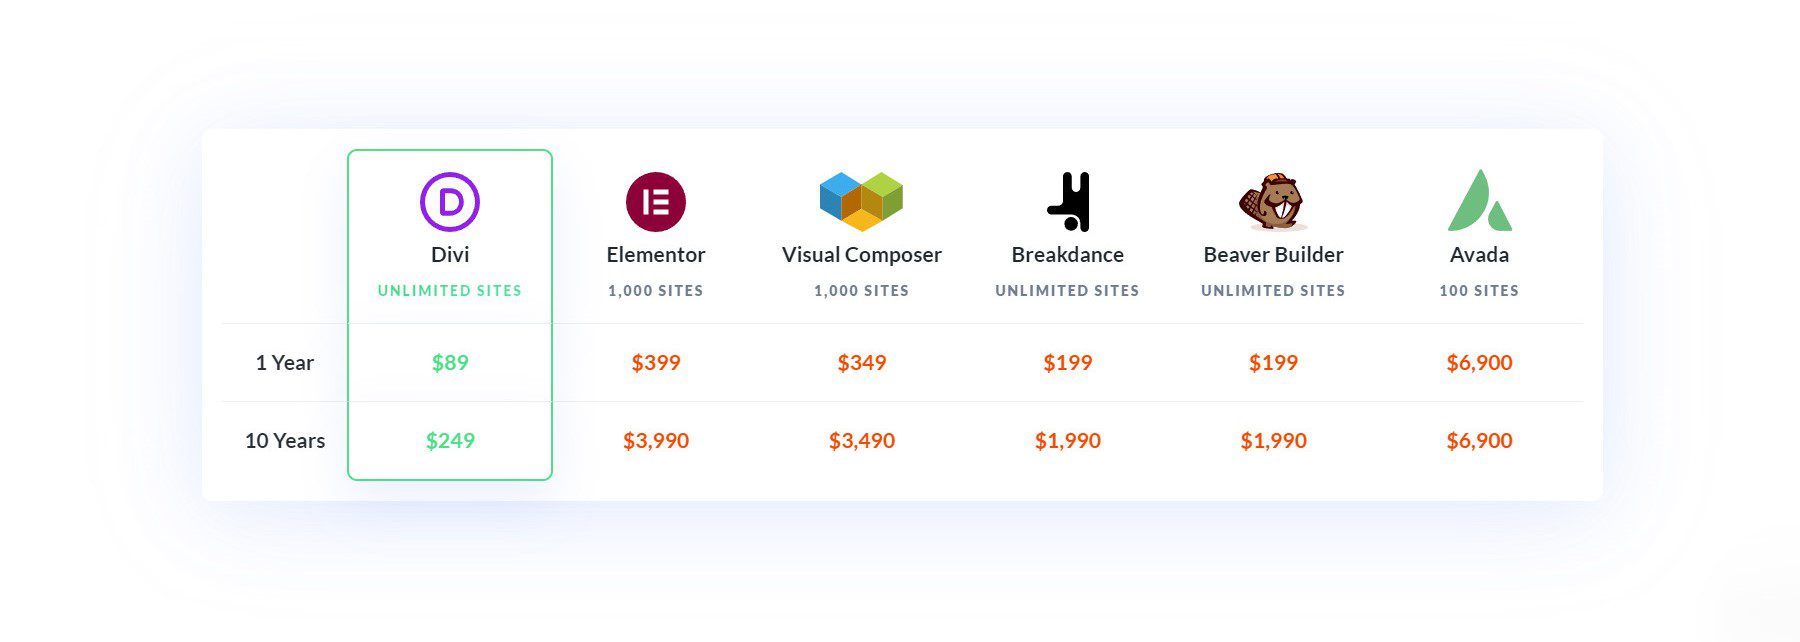 Divi Price Comparison to Other Page Builders